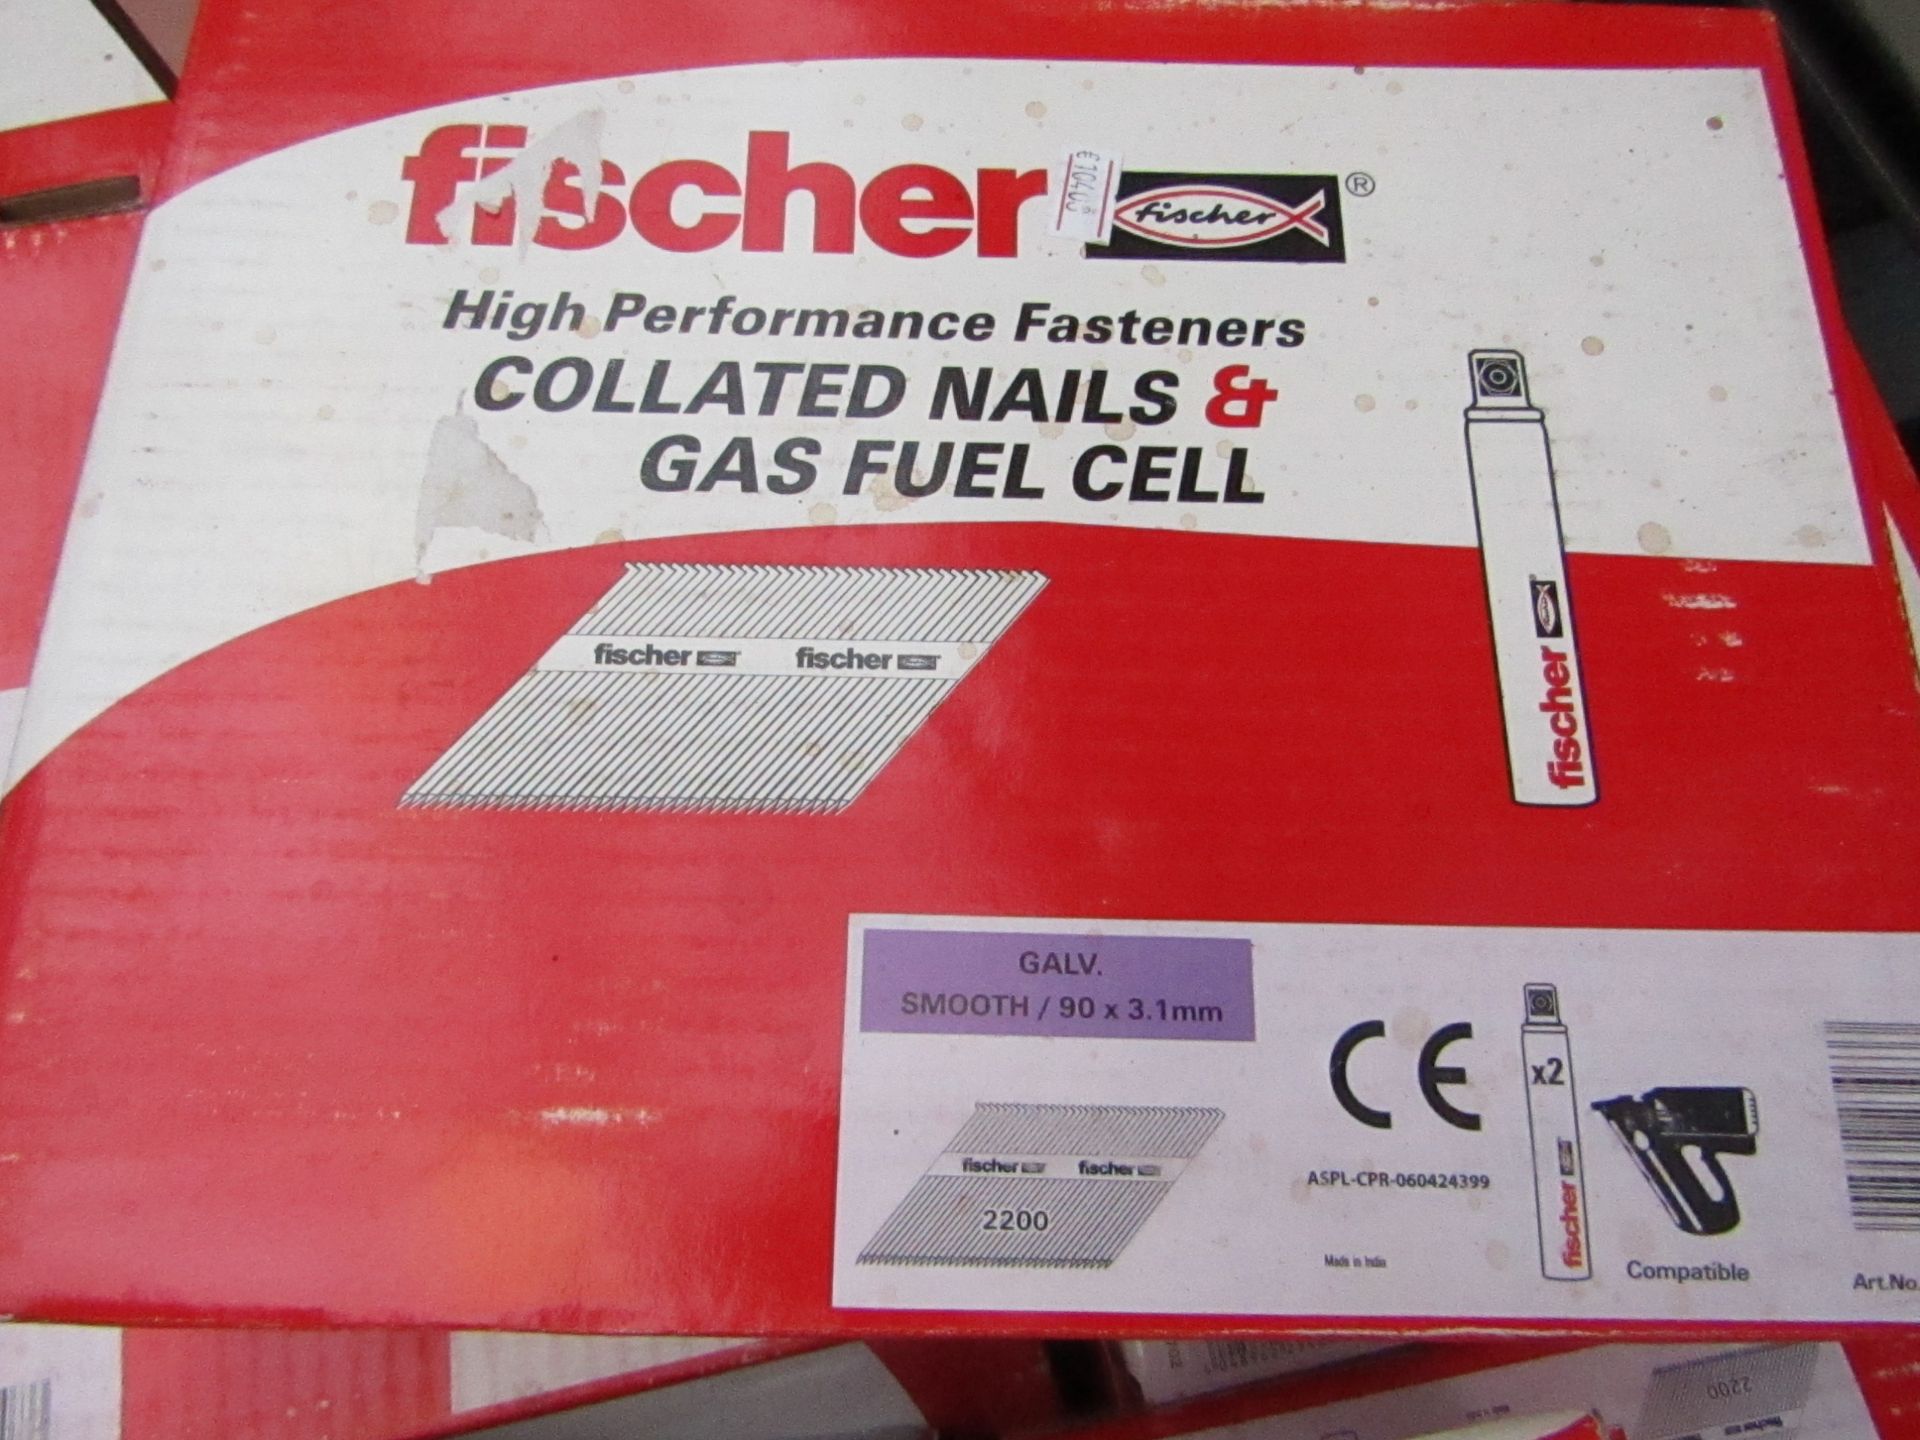 Fischer High Perfromace Collated nails and gas fuel cell sets, includes 2200 90x3.1mm galvanised